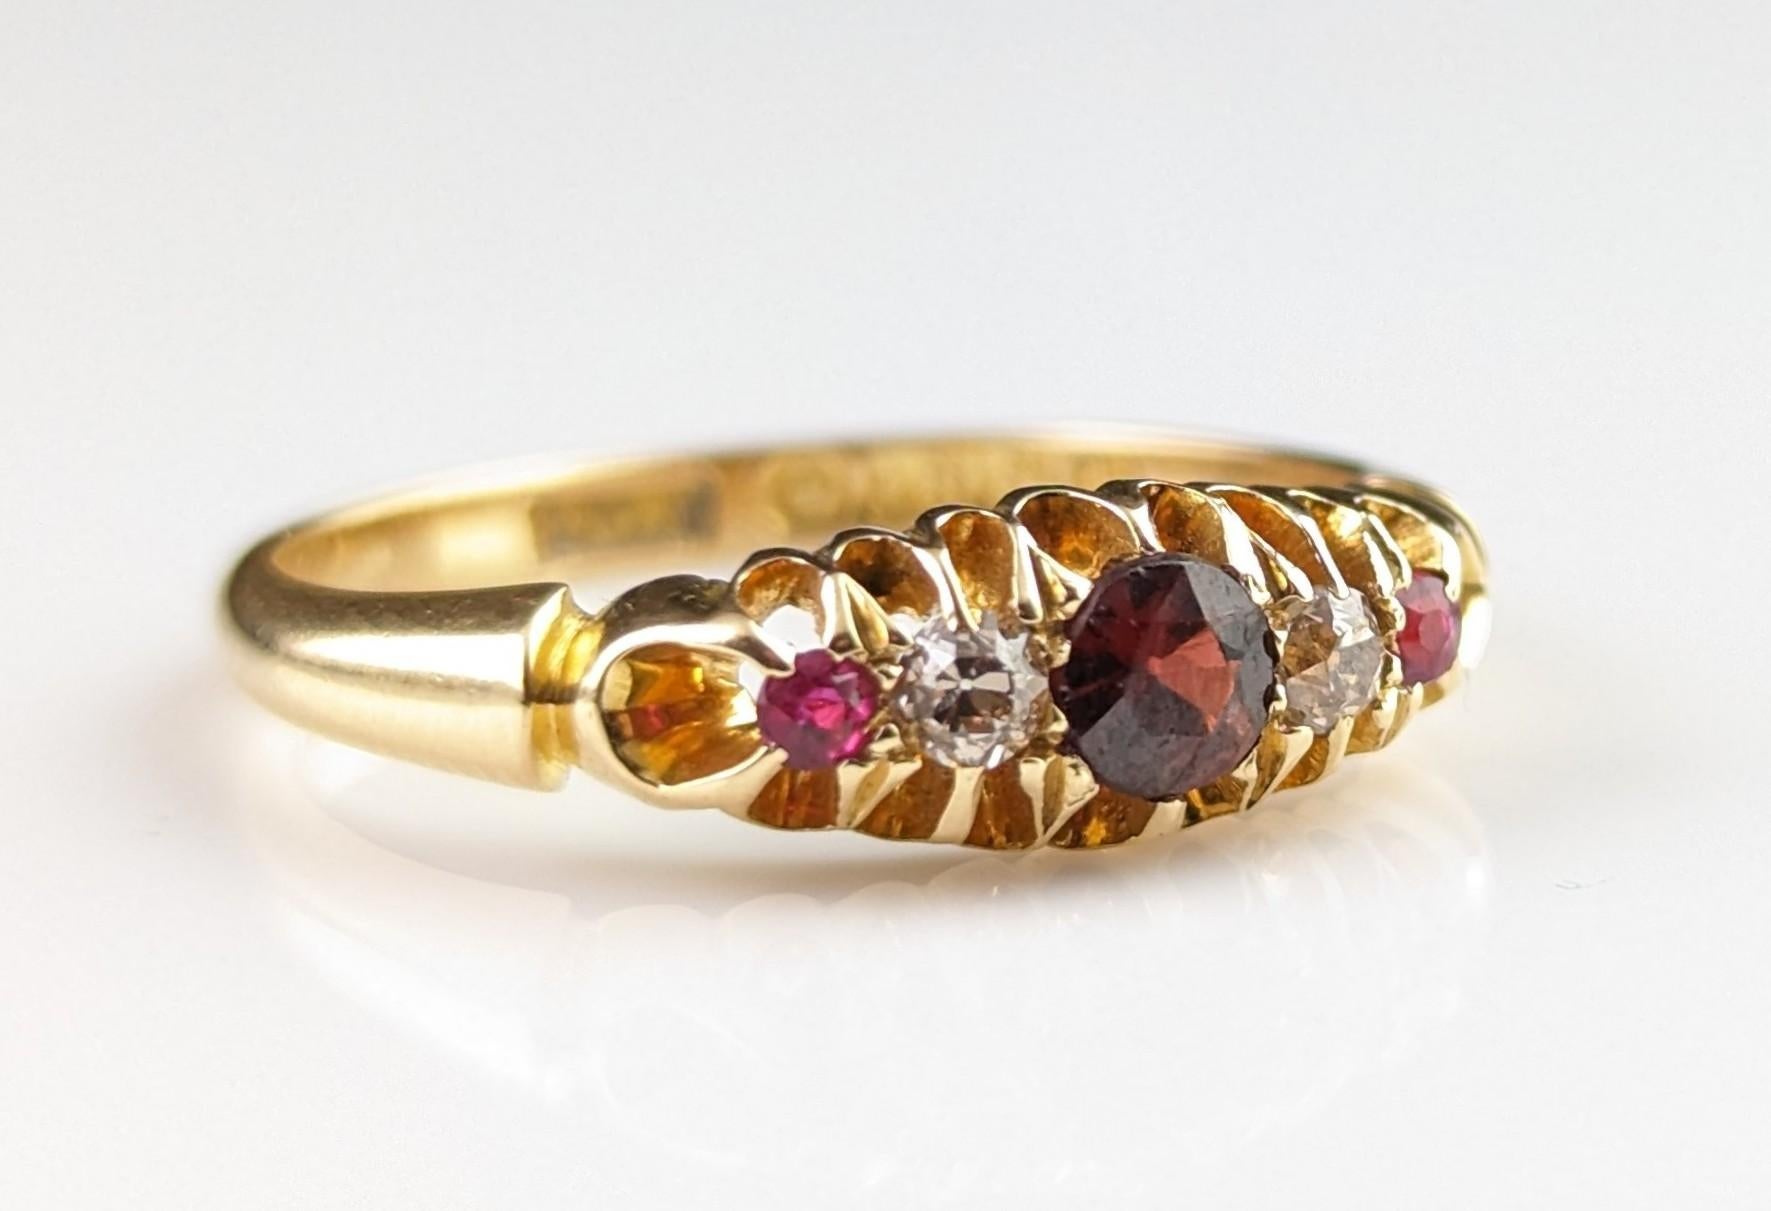 Antique Garnet, Ruby and Diamond Ring, 18ct Gold 8